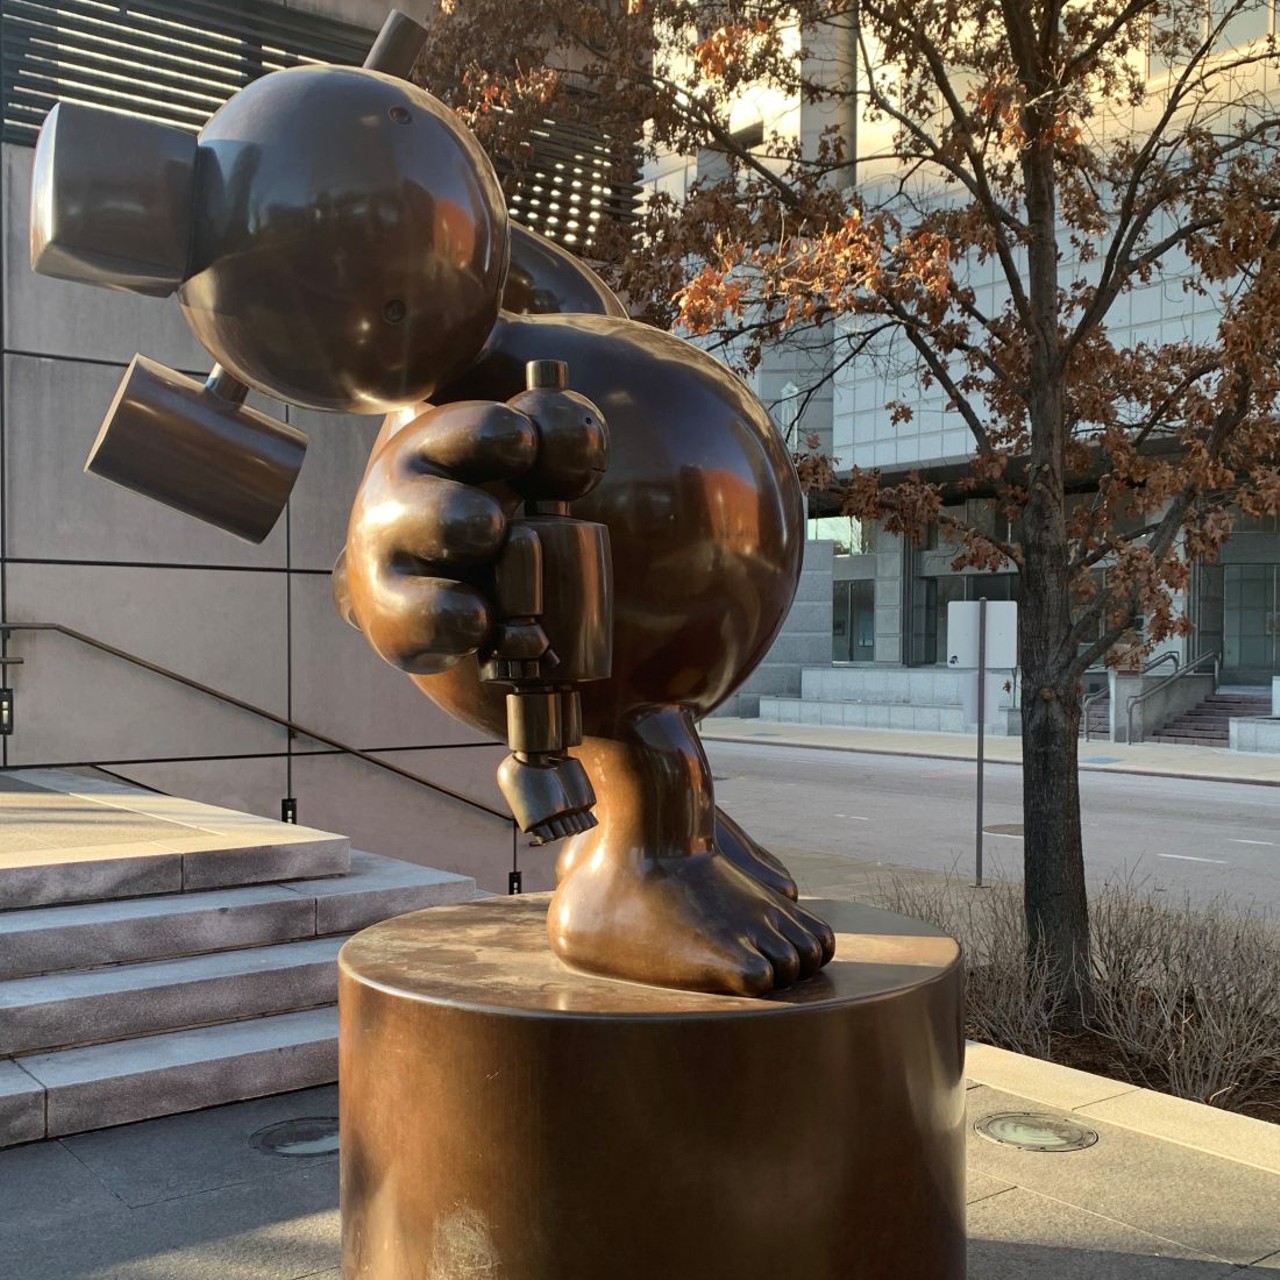 "Kindly Geppetoo&#148;
Citygarden Sculpture Park by Kaldi&#146;s Coffee (808 Chestnut Street)
Sculpture made by American artist Tom Otterness.
Photo credit: Riverfront Times / @riverfronttimes on Instagram